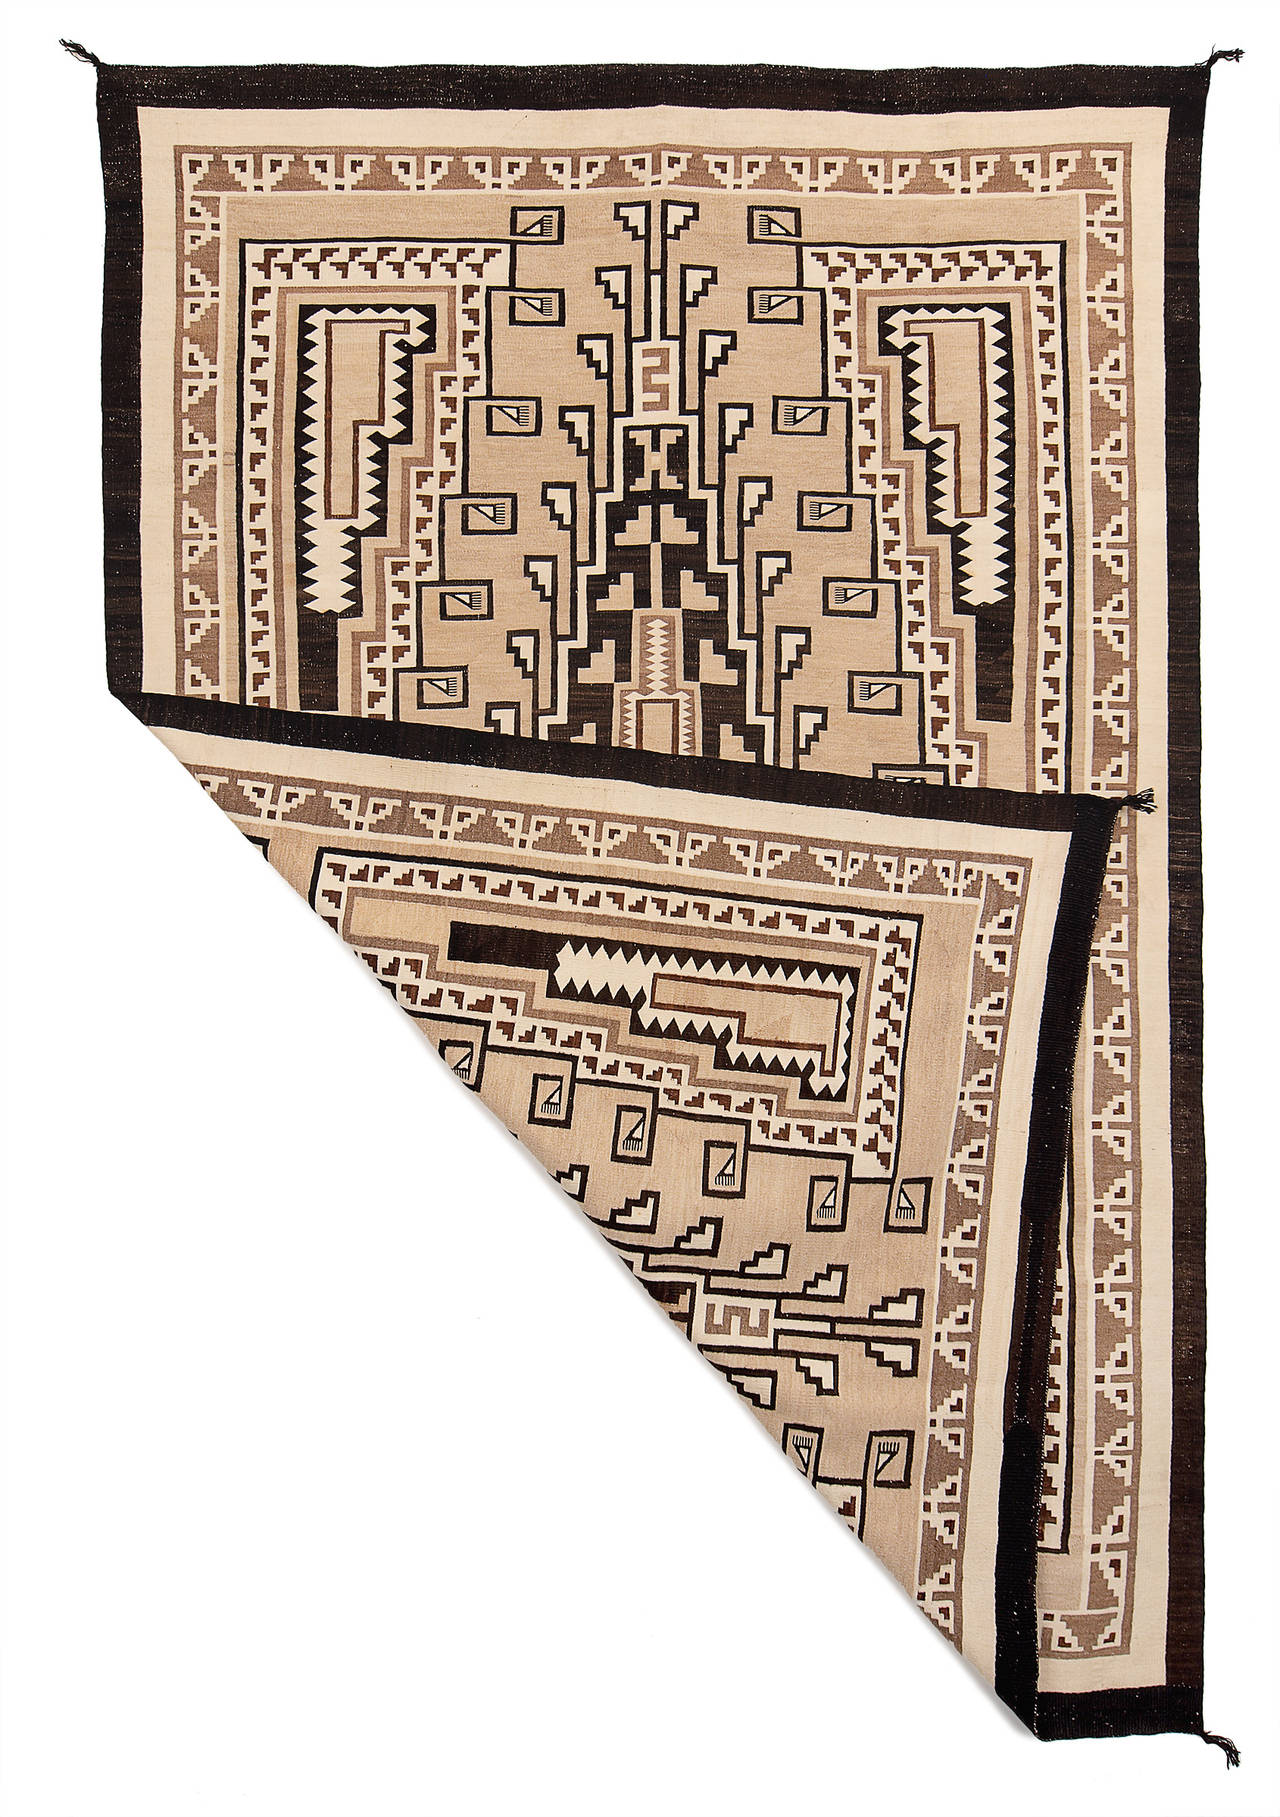 A spectacular Two Gray Hills textile created by master weaver, Cora Curley in an intricate design with elements similar to Crystal pattern rugs.  The Two Gray Hills Trading Post was established in 1897 on the Navajo Reservation near Tohatchi, New